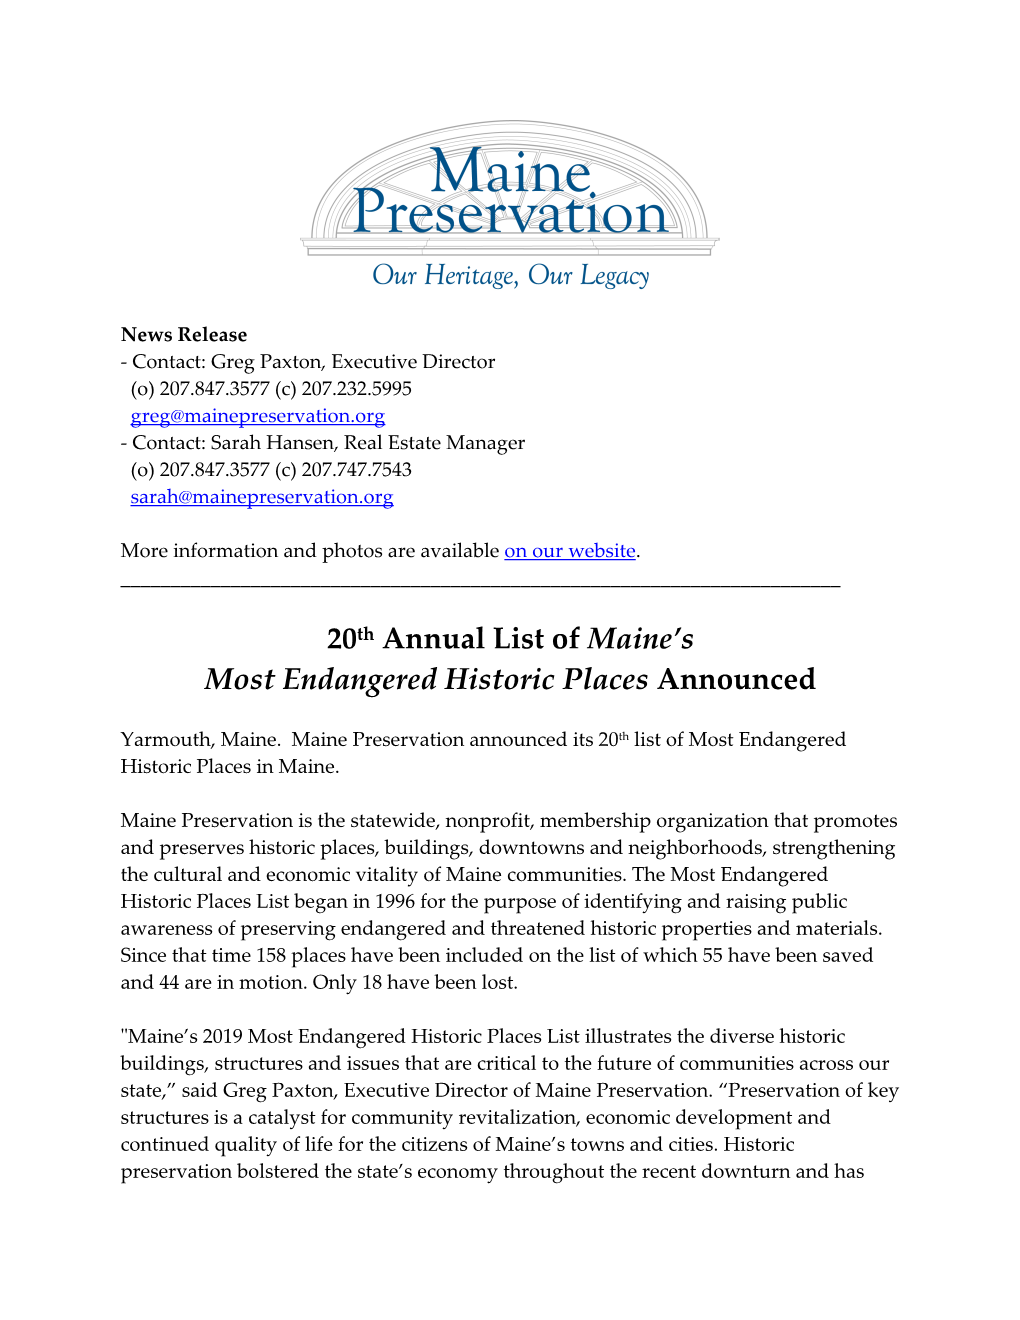 20Th Annual List of Maine's Most Endangered Historic Places